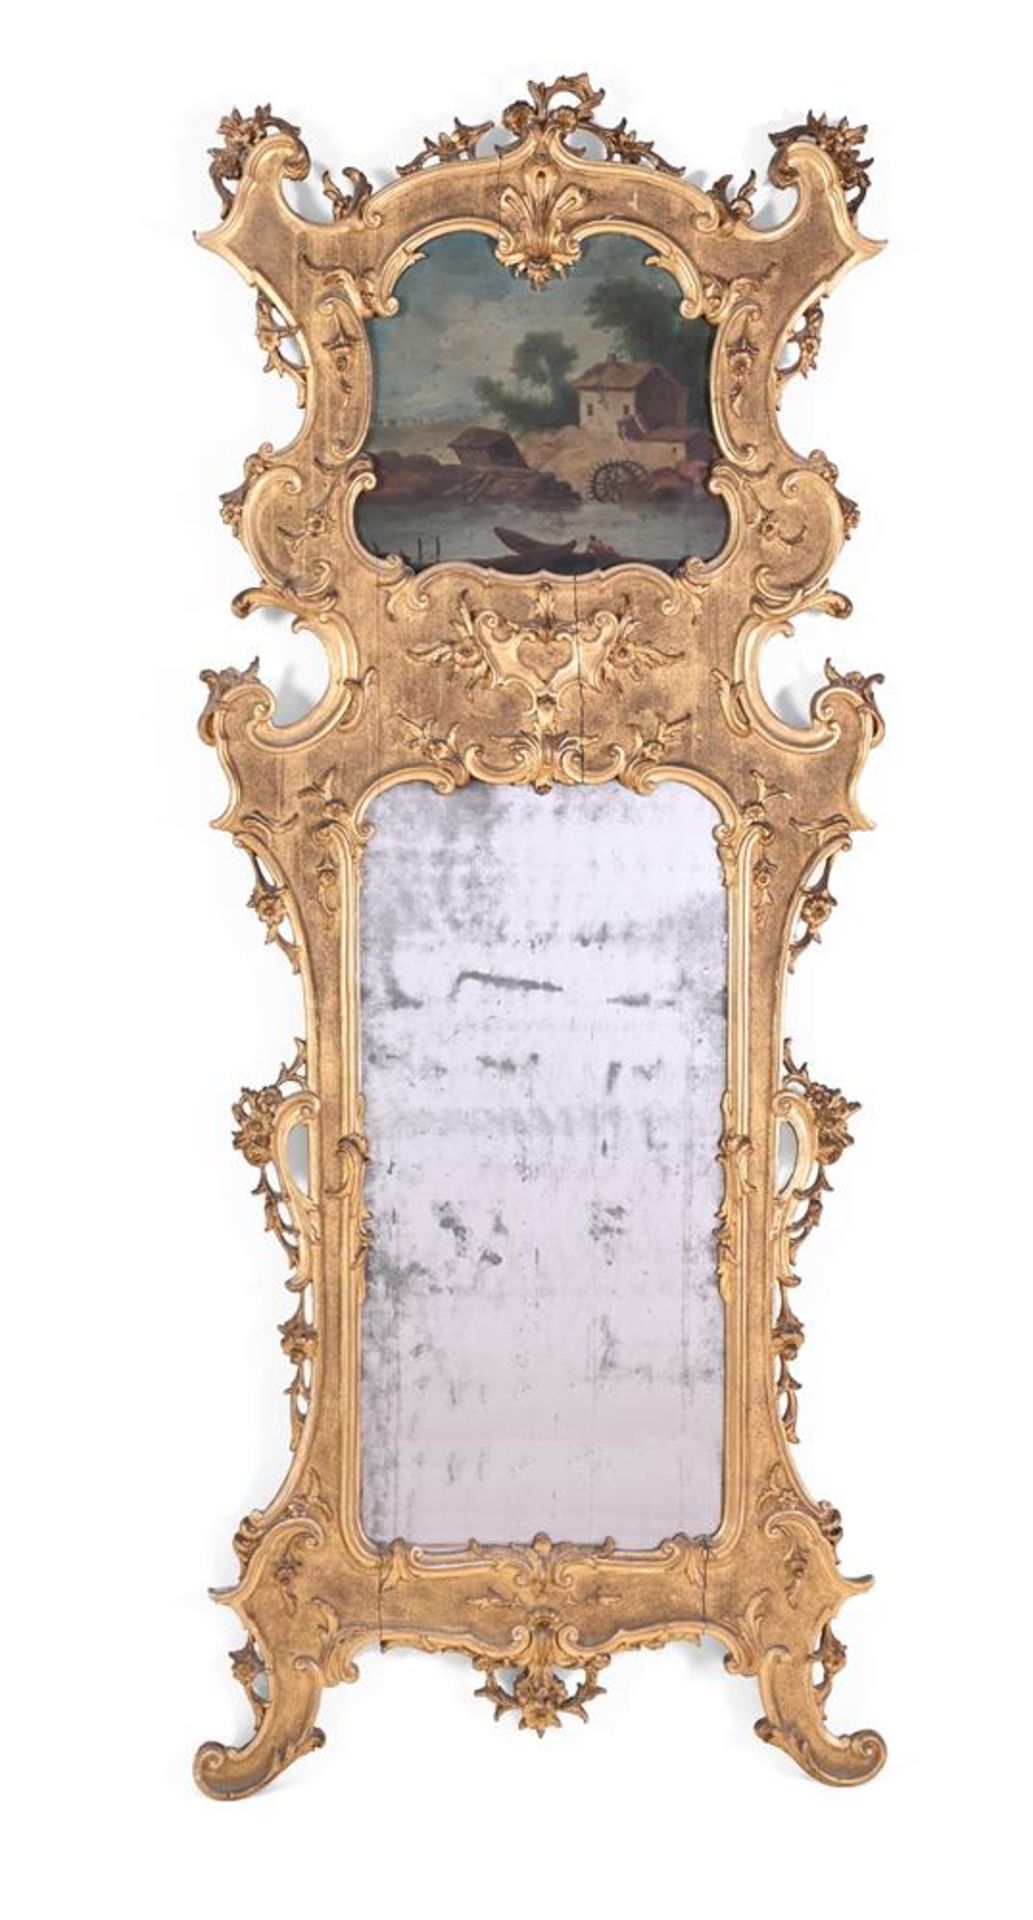 A PAIR OF ITALIAN CARVED GILTWOOD TRUMEAU MIRRORS, 19TH CENTURY - Image 2 of 7